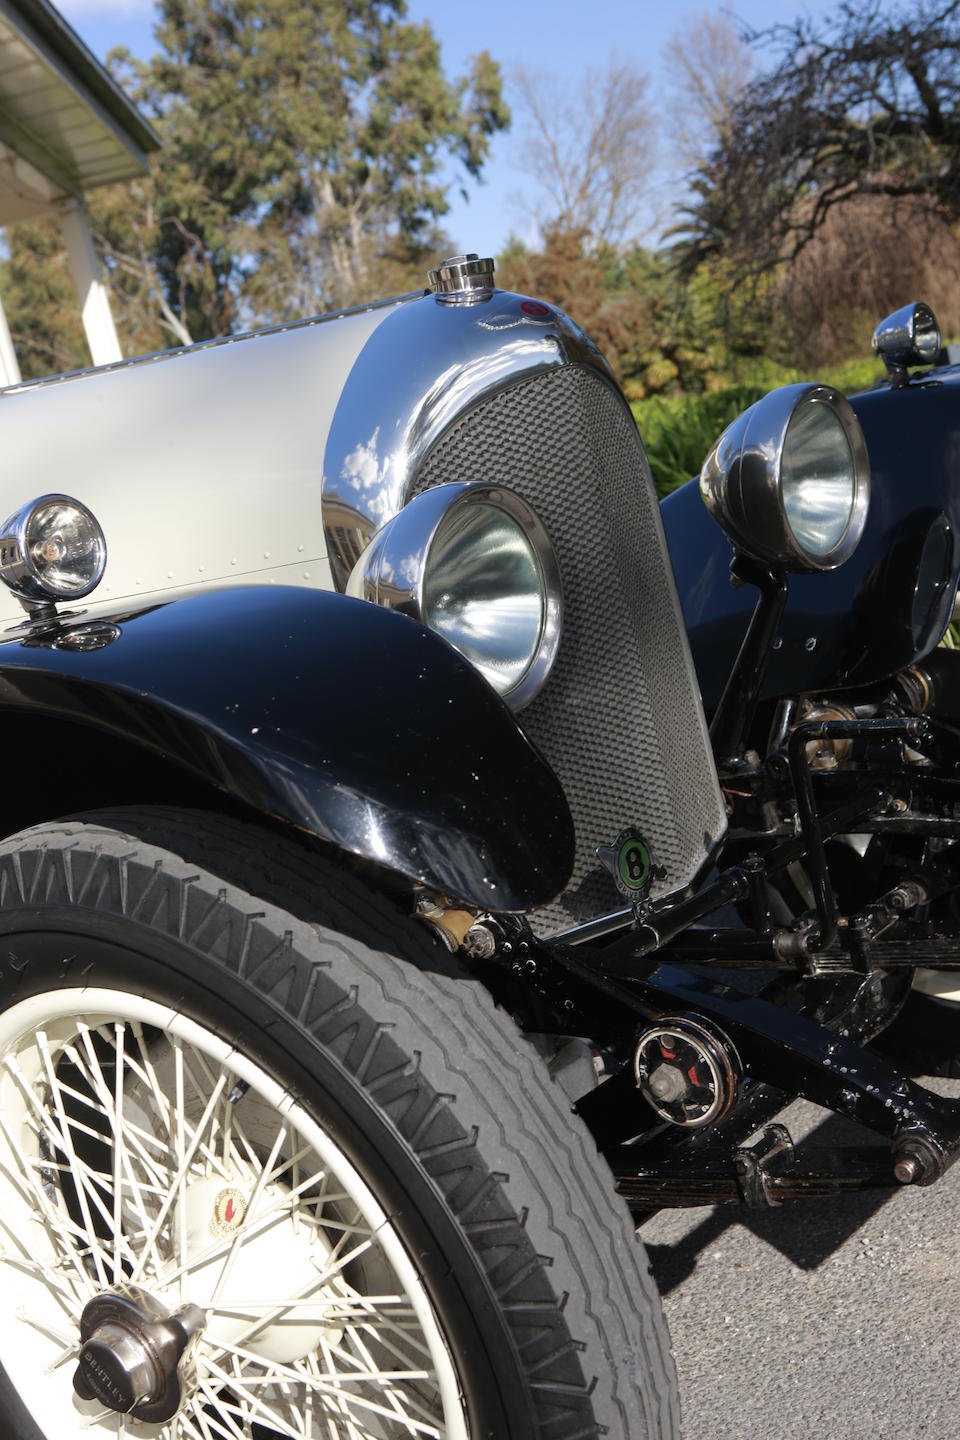 Formerly the property of The Late. John Cresswell,1925 Bentley 3-litre Speed Model Tourer  Chassis no. 1054 Engine no. 1077 Body no. 1144